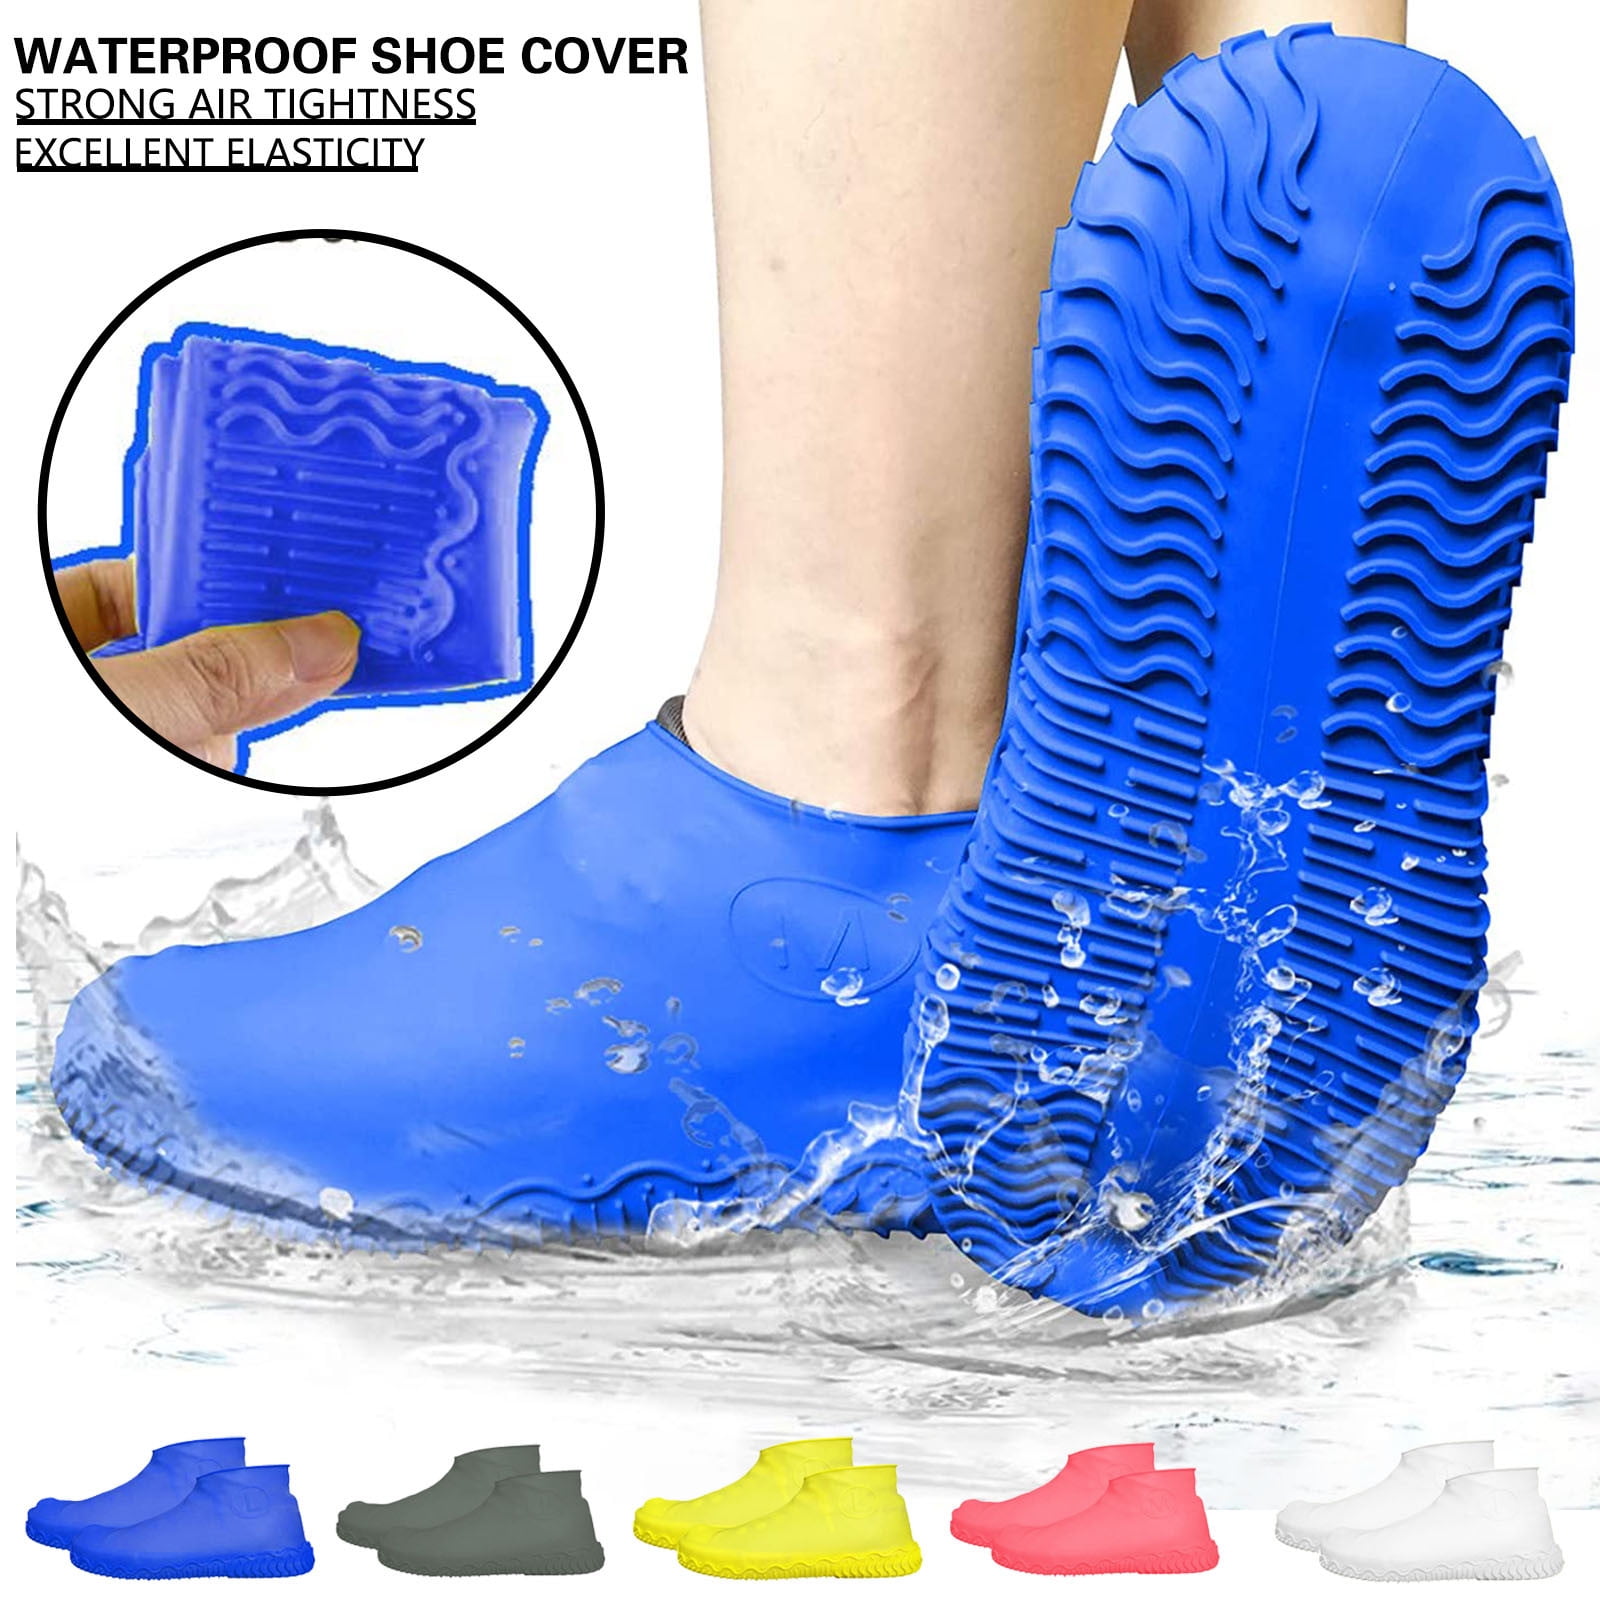 Reusable Silicone Overshoes Rain Waterproof Shoe Covers Boot Cover Protector hot 